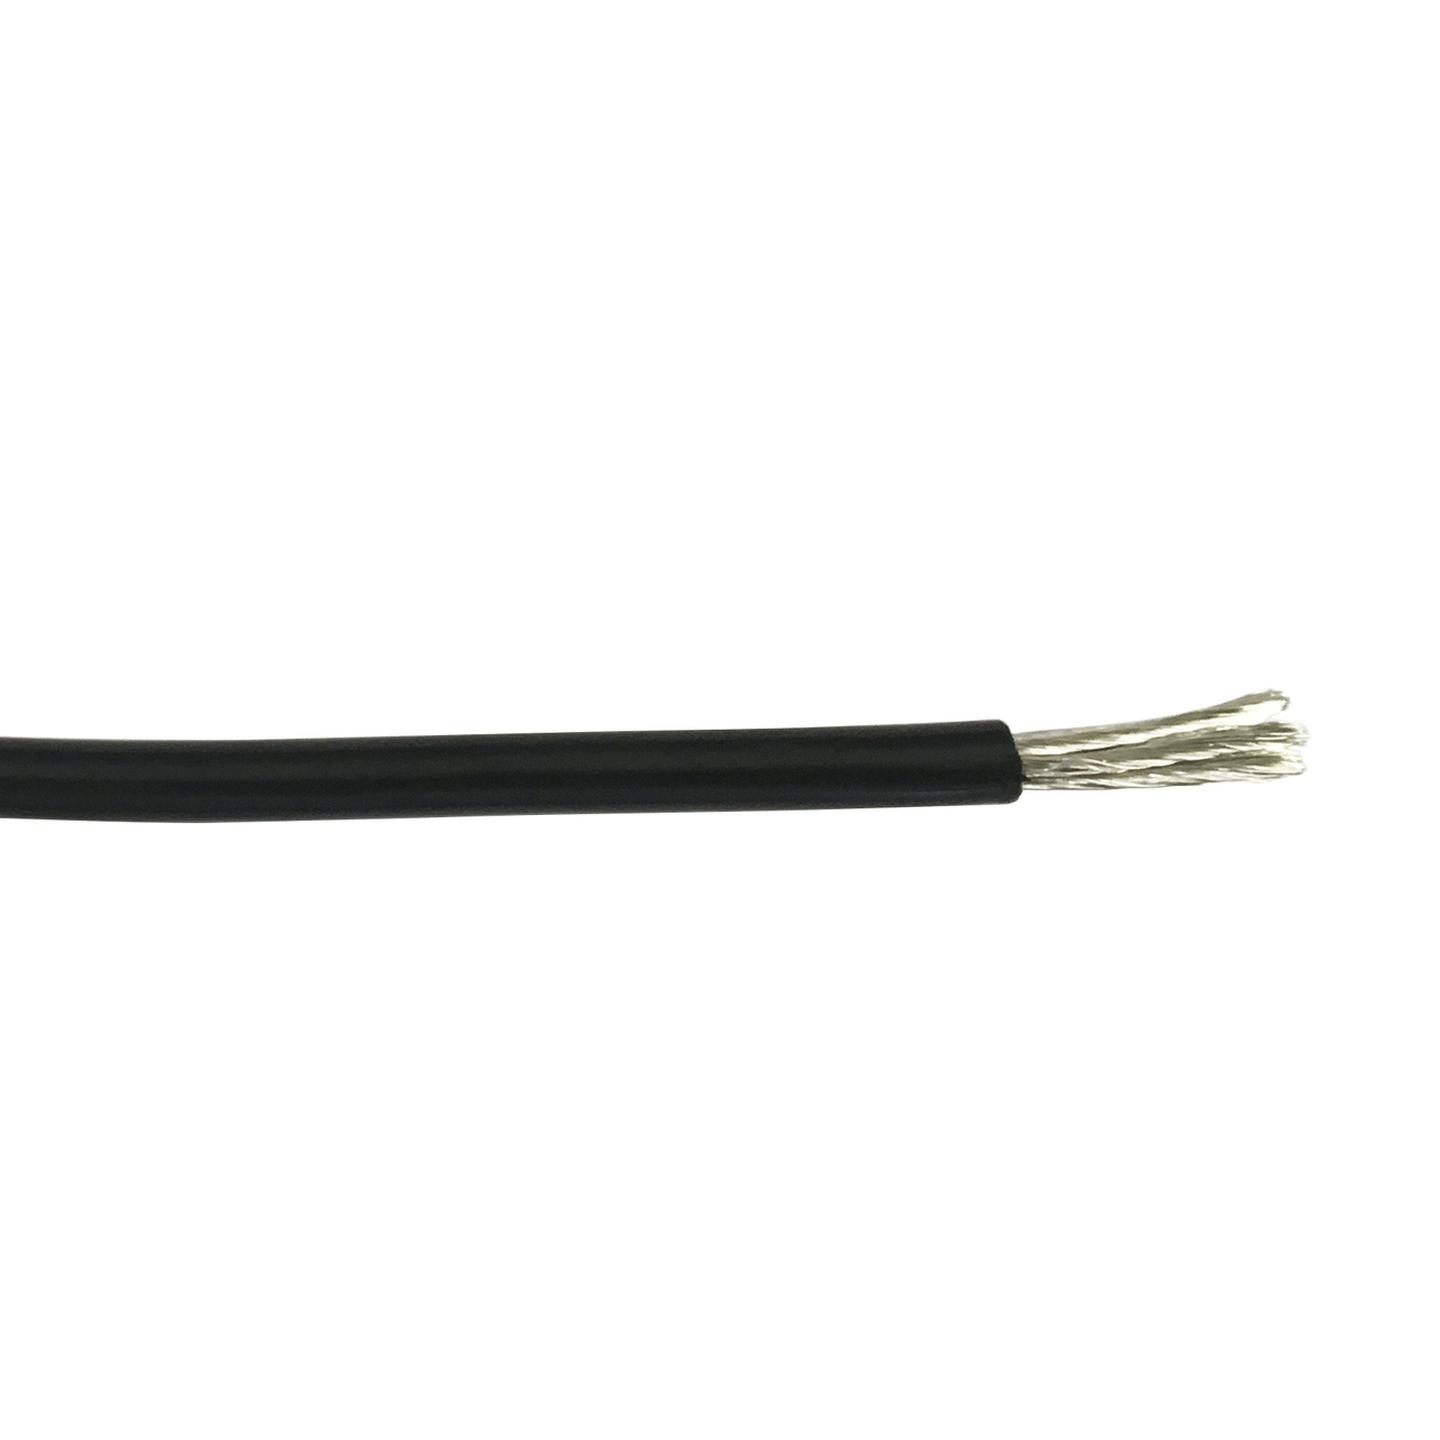 Black 10GA OFC High Current Power Cable - Per Meter